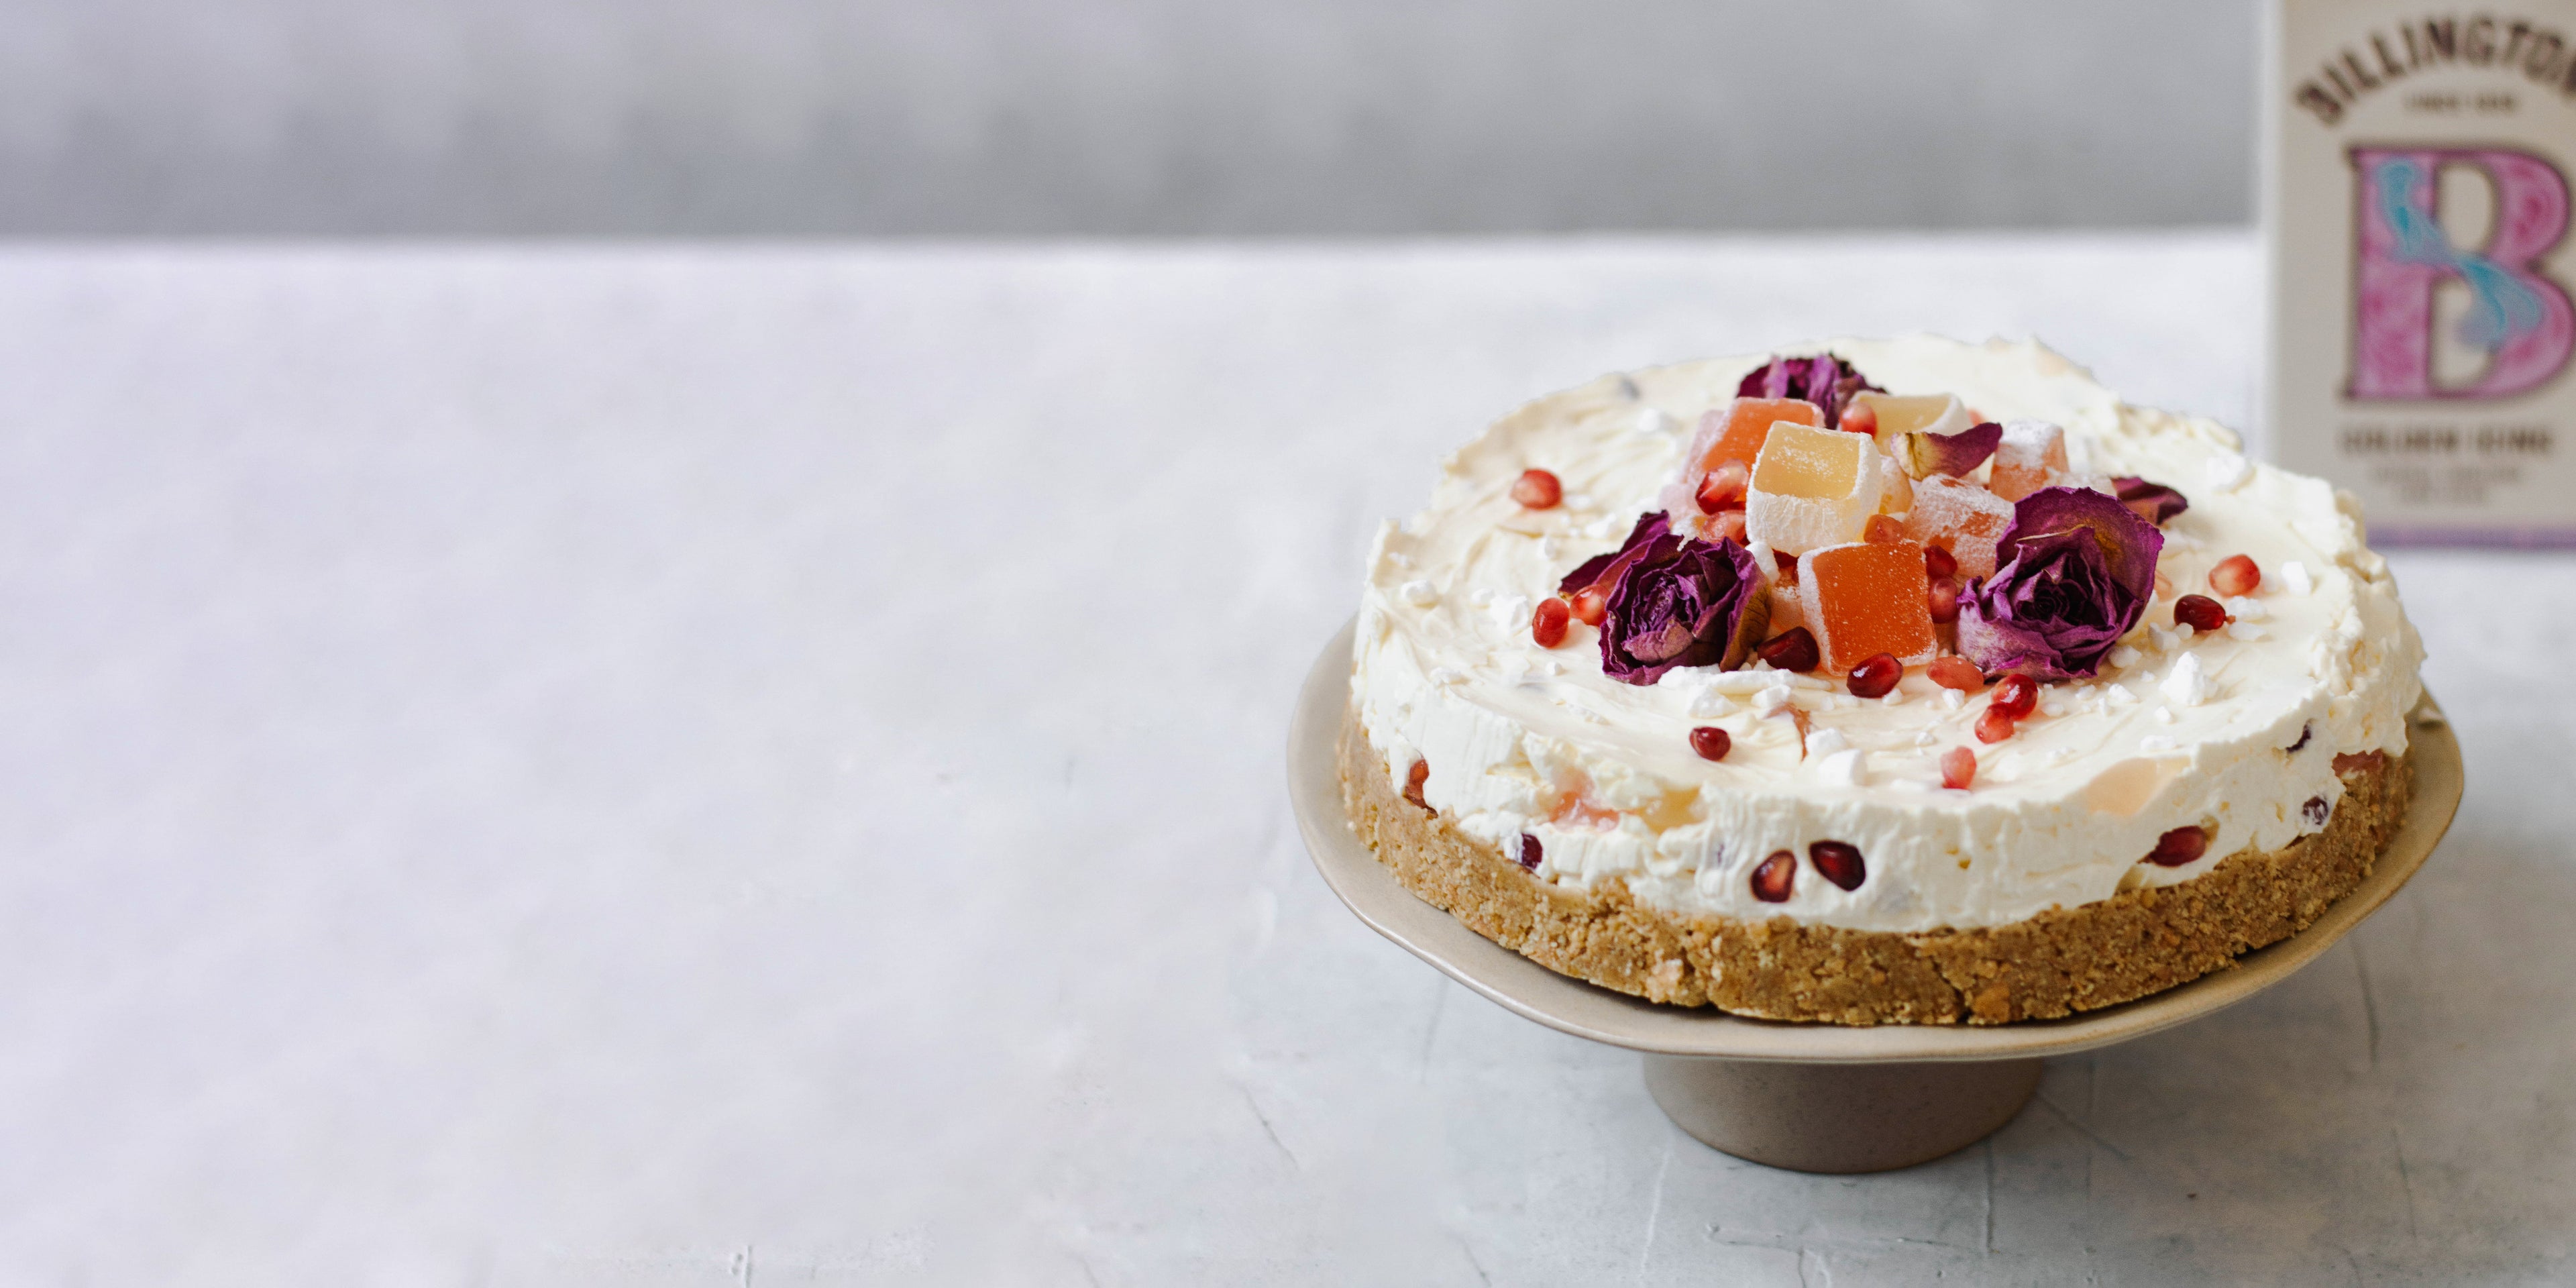 Turkish delight cheesecake on a cake stand, with a box of Billington's golden icing sugar in the background